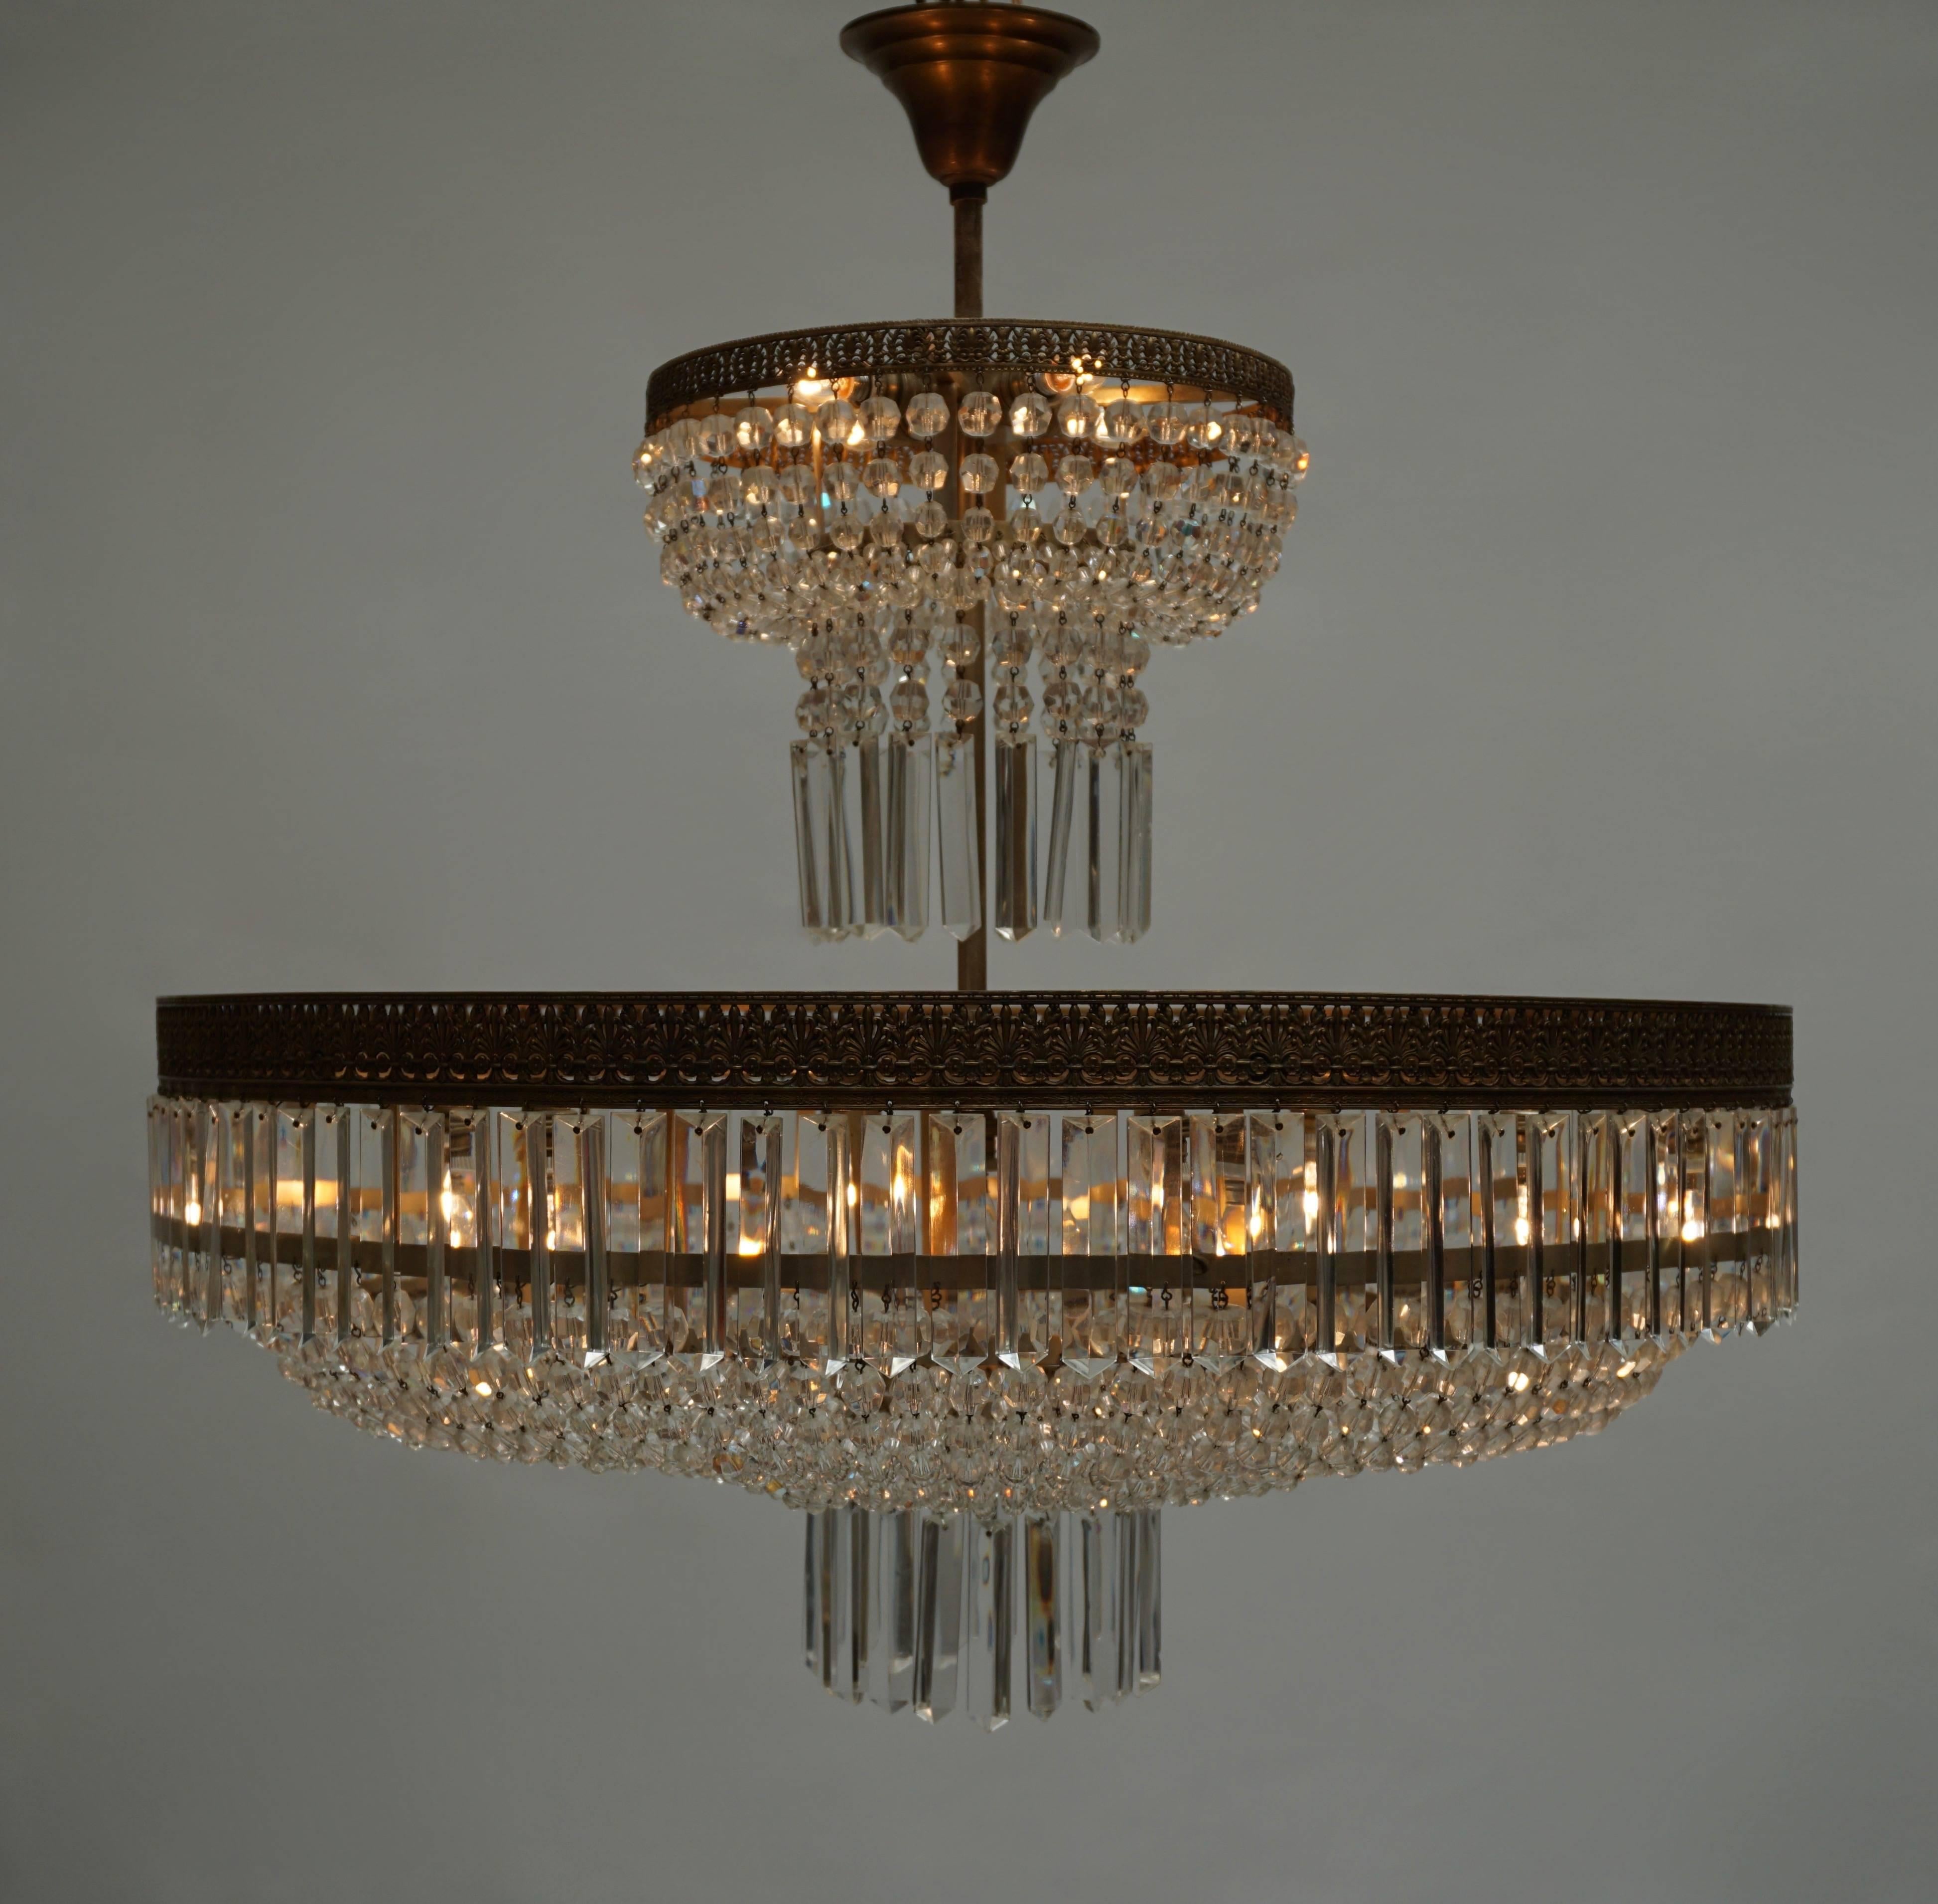 Crystal and brass chandelier with 11 E14 bulbs.
Measures: Diameter: 70 cm.
Height fixture: 58 cm.
Total height with the chain: 72 cm.